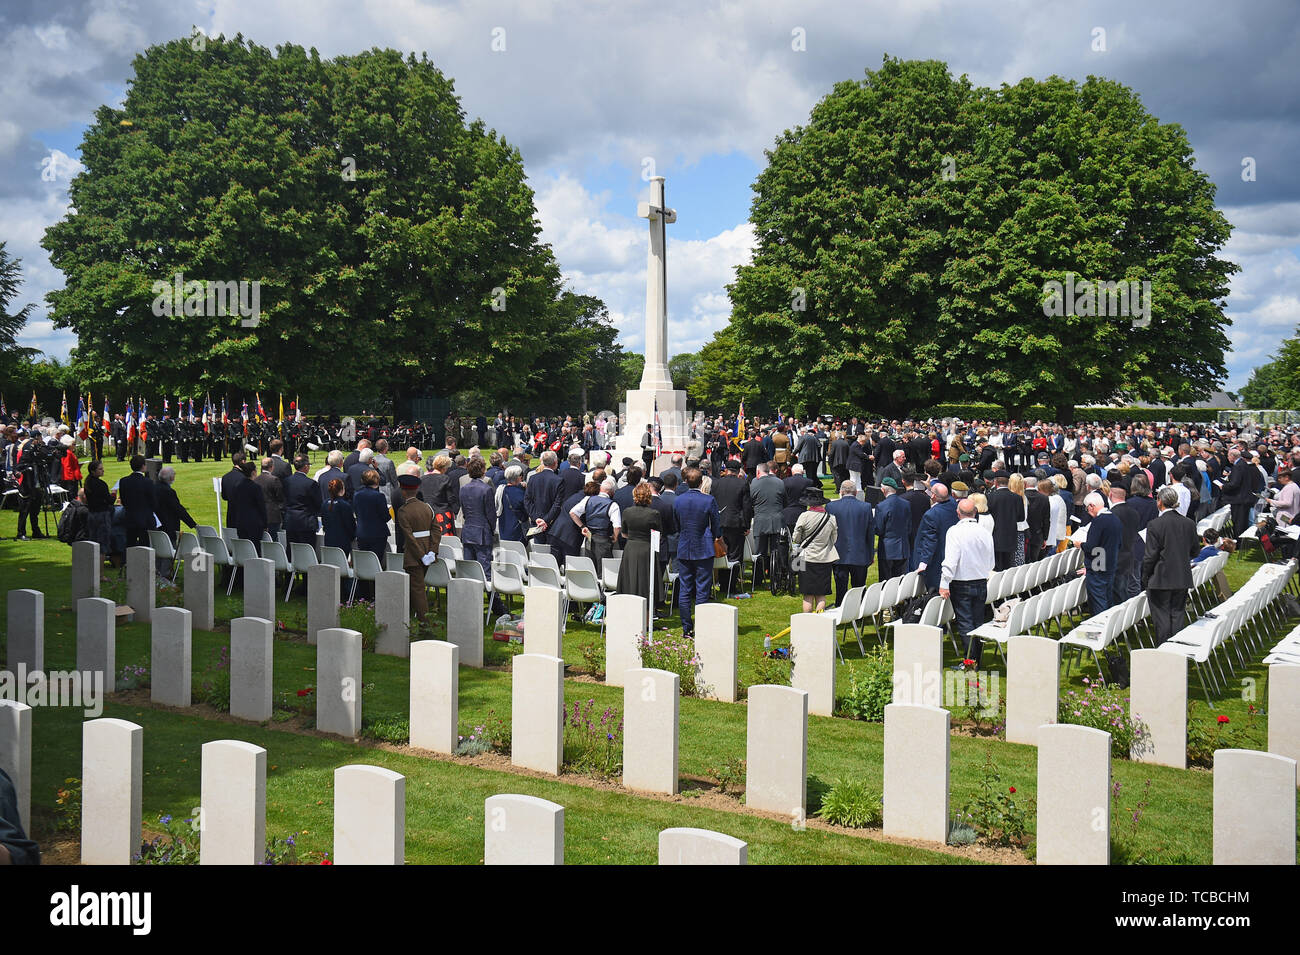 The Royal British Legion's Service of Remembrance, at the Commonwealth War Graves Commission Cemetery, in Bayeux, France, as part of commemorations for the 75th anniversary of the D-Day landings. Stock Photo